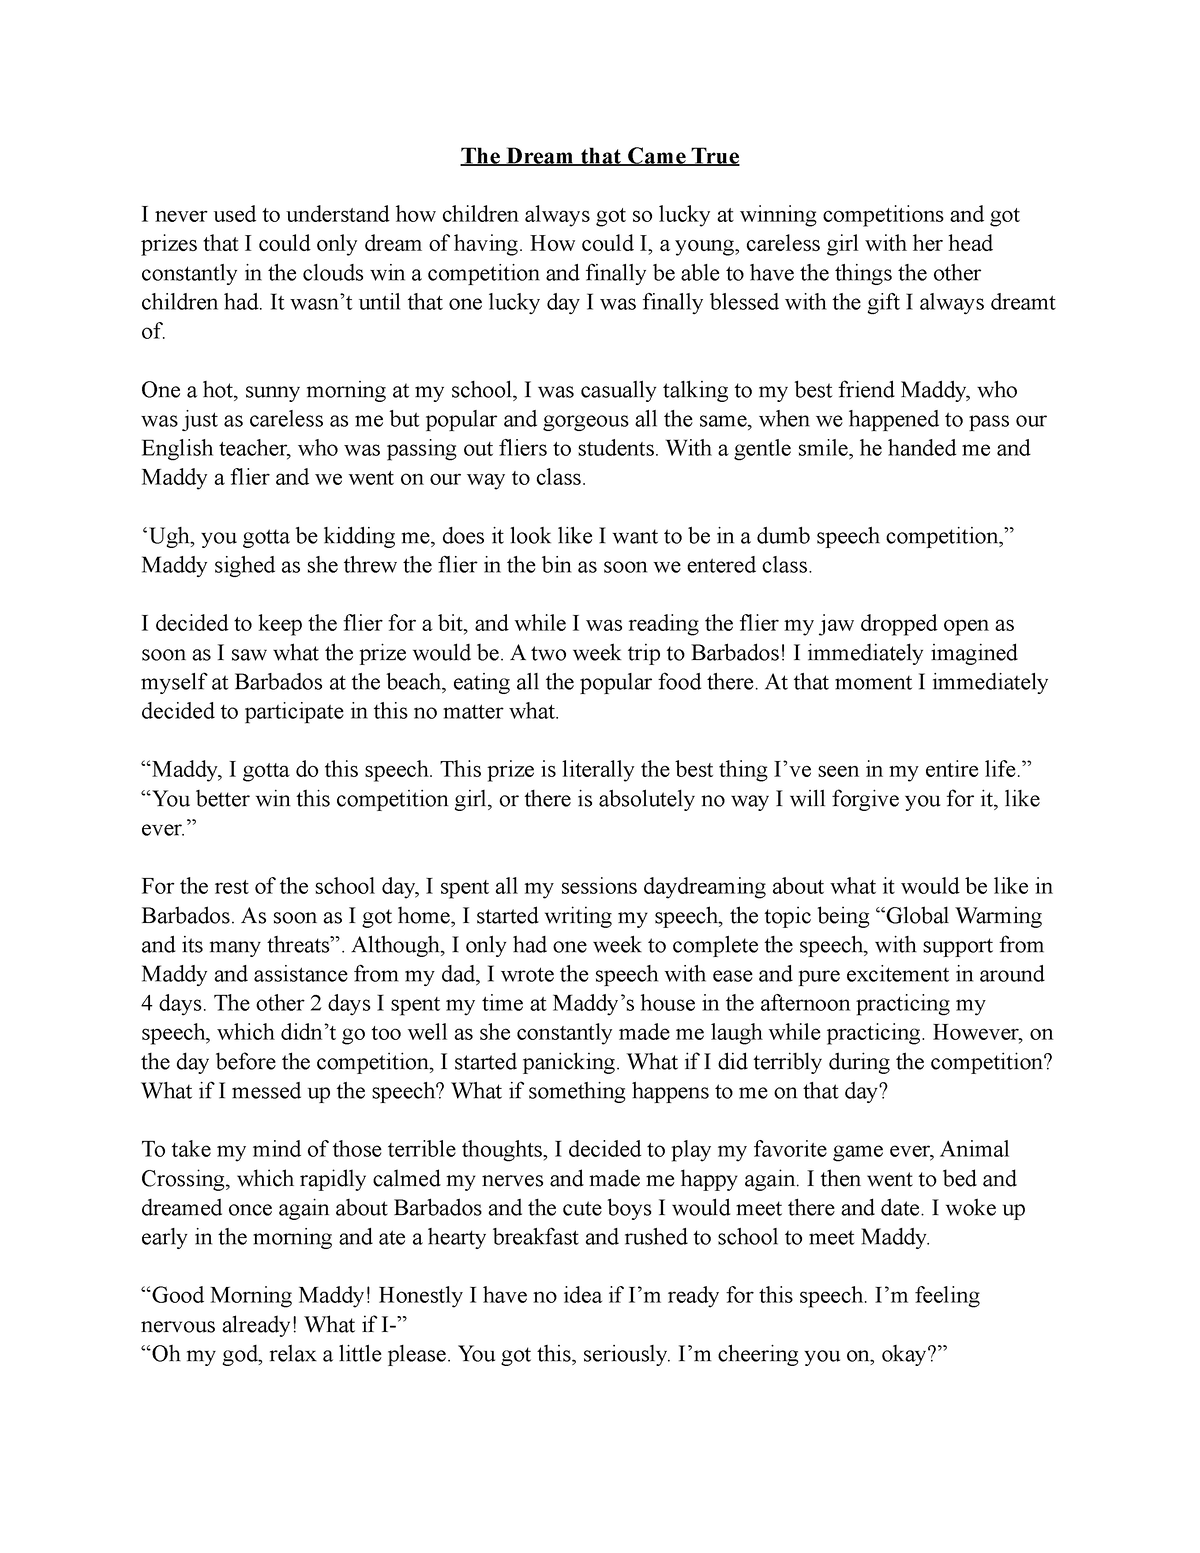 essay on a dream that came true for class 6